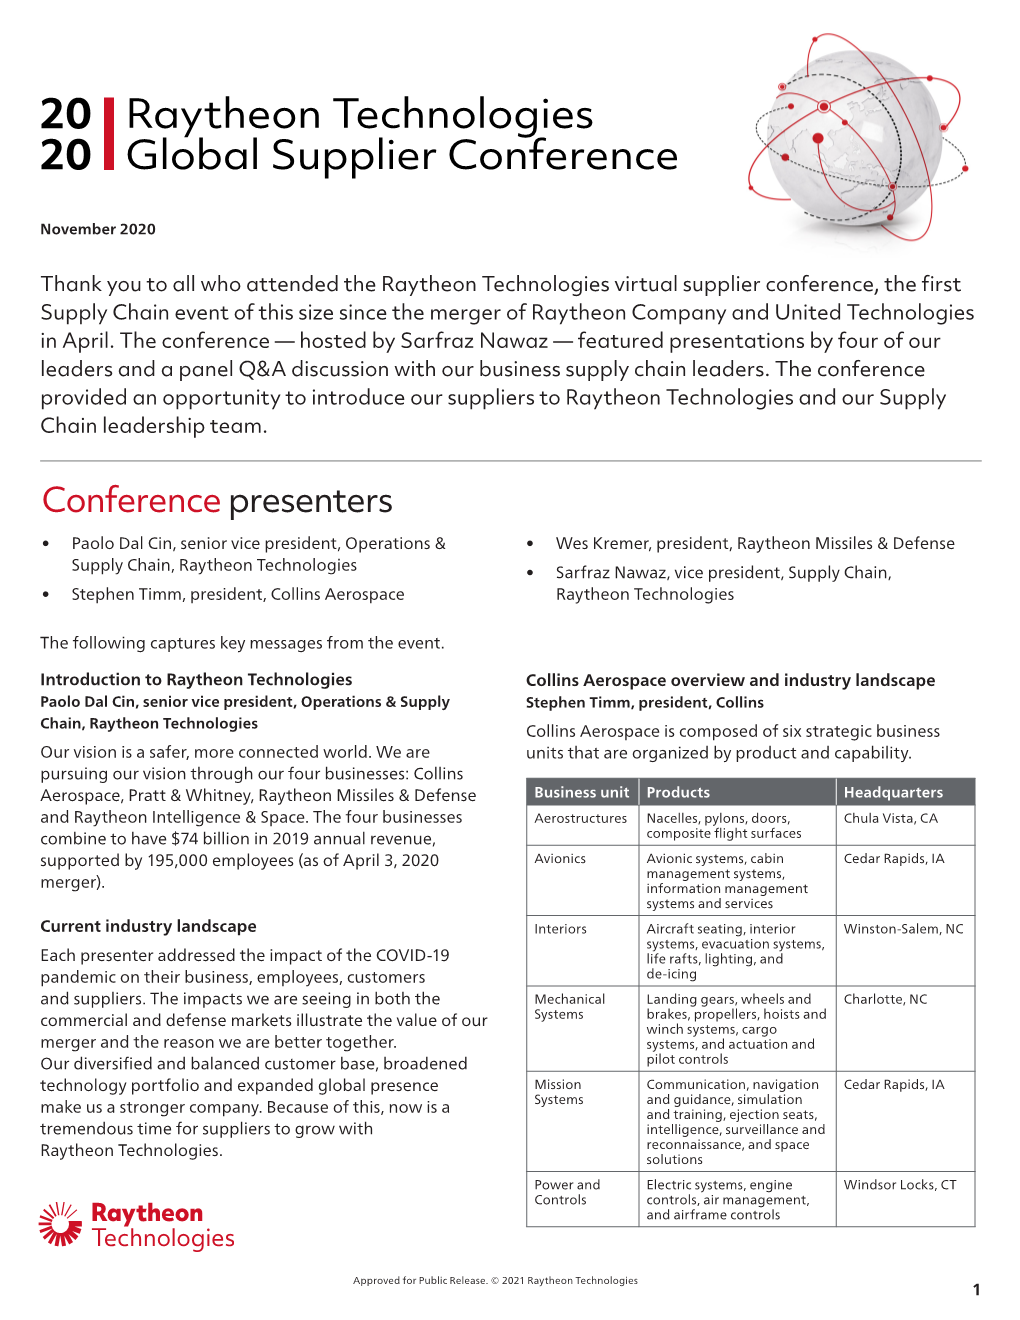 Raytheon Technologies Global Supplier Conference